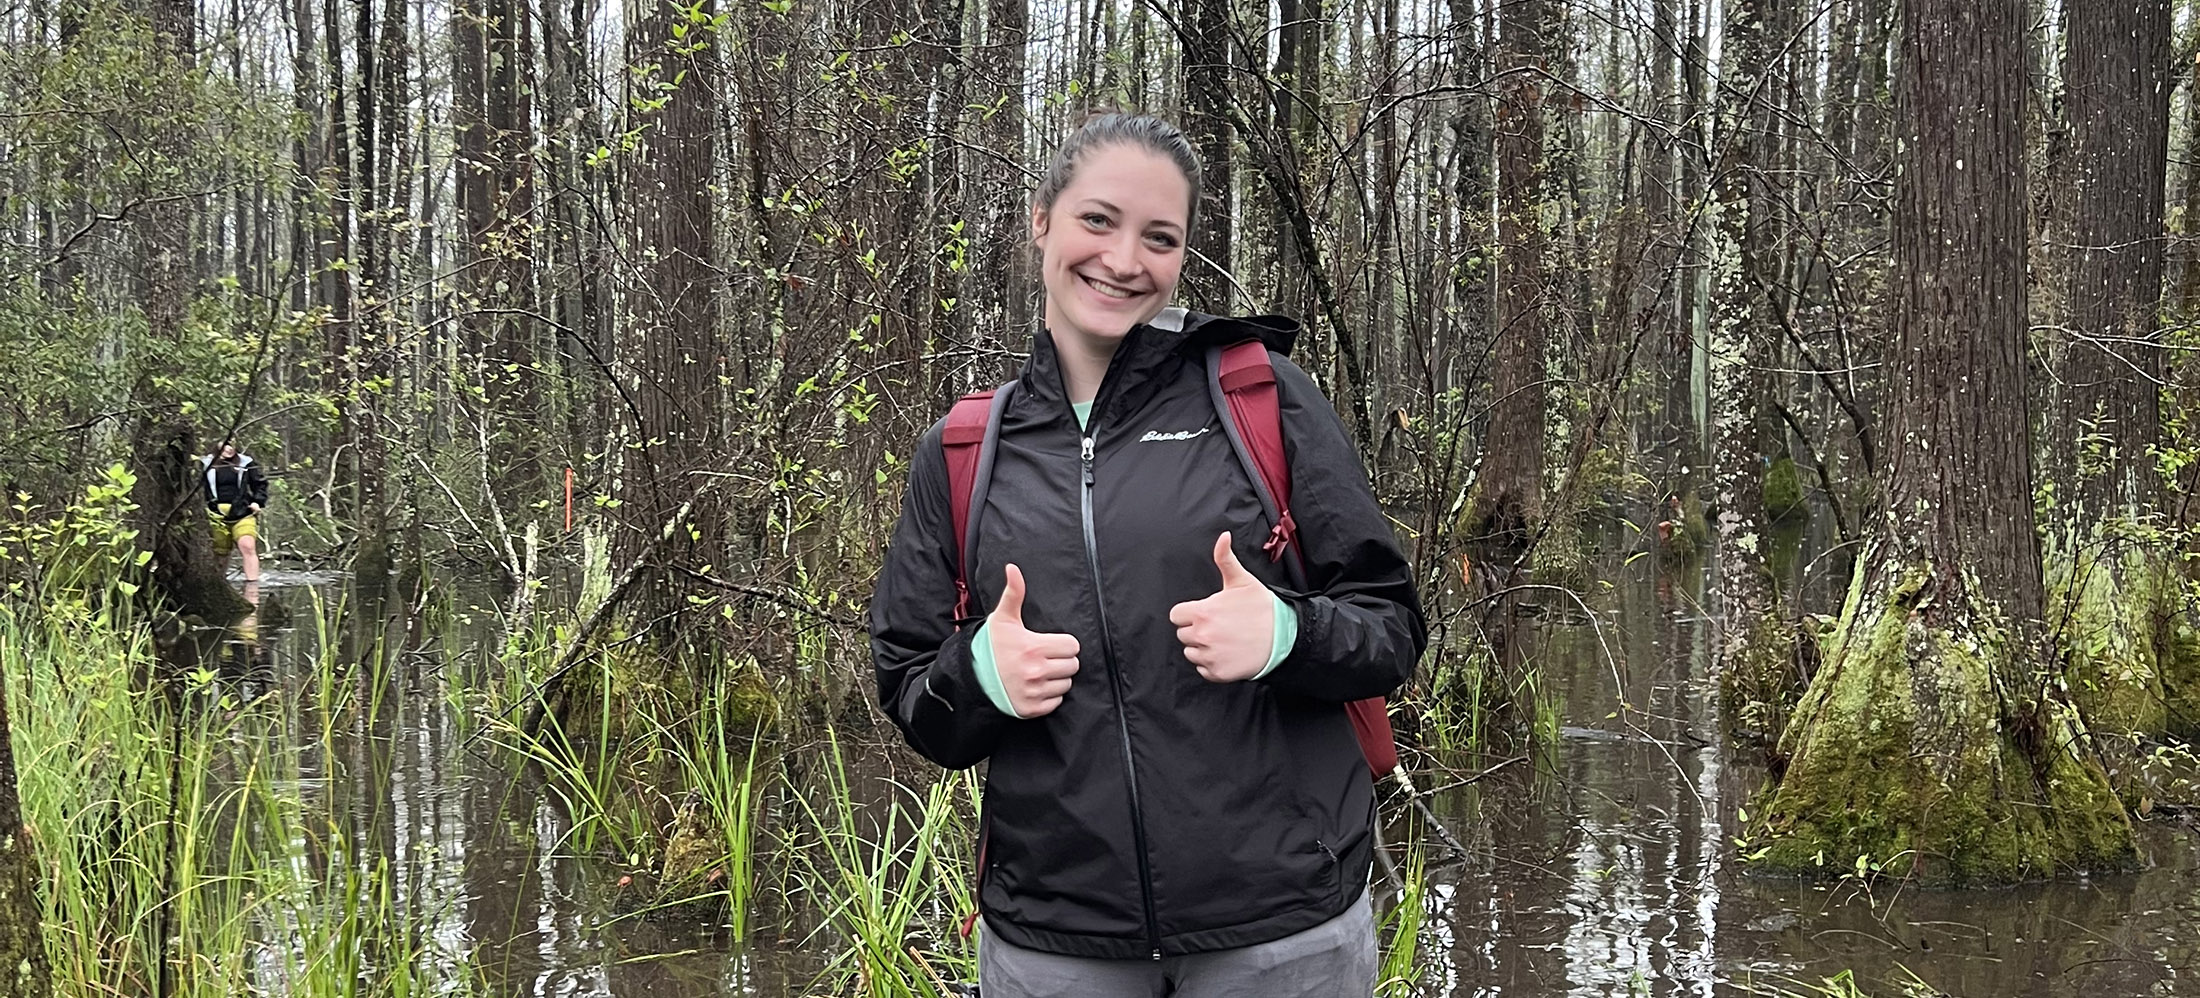 A young woman stands in a swamp surrounded by trees